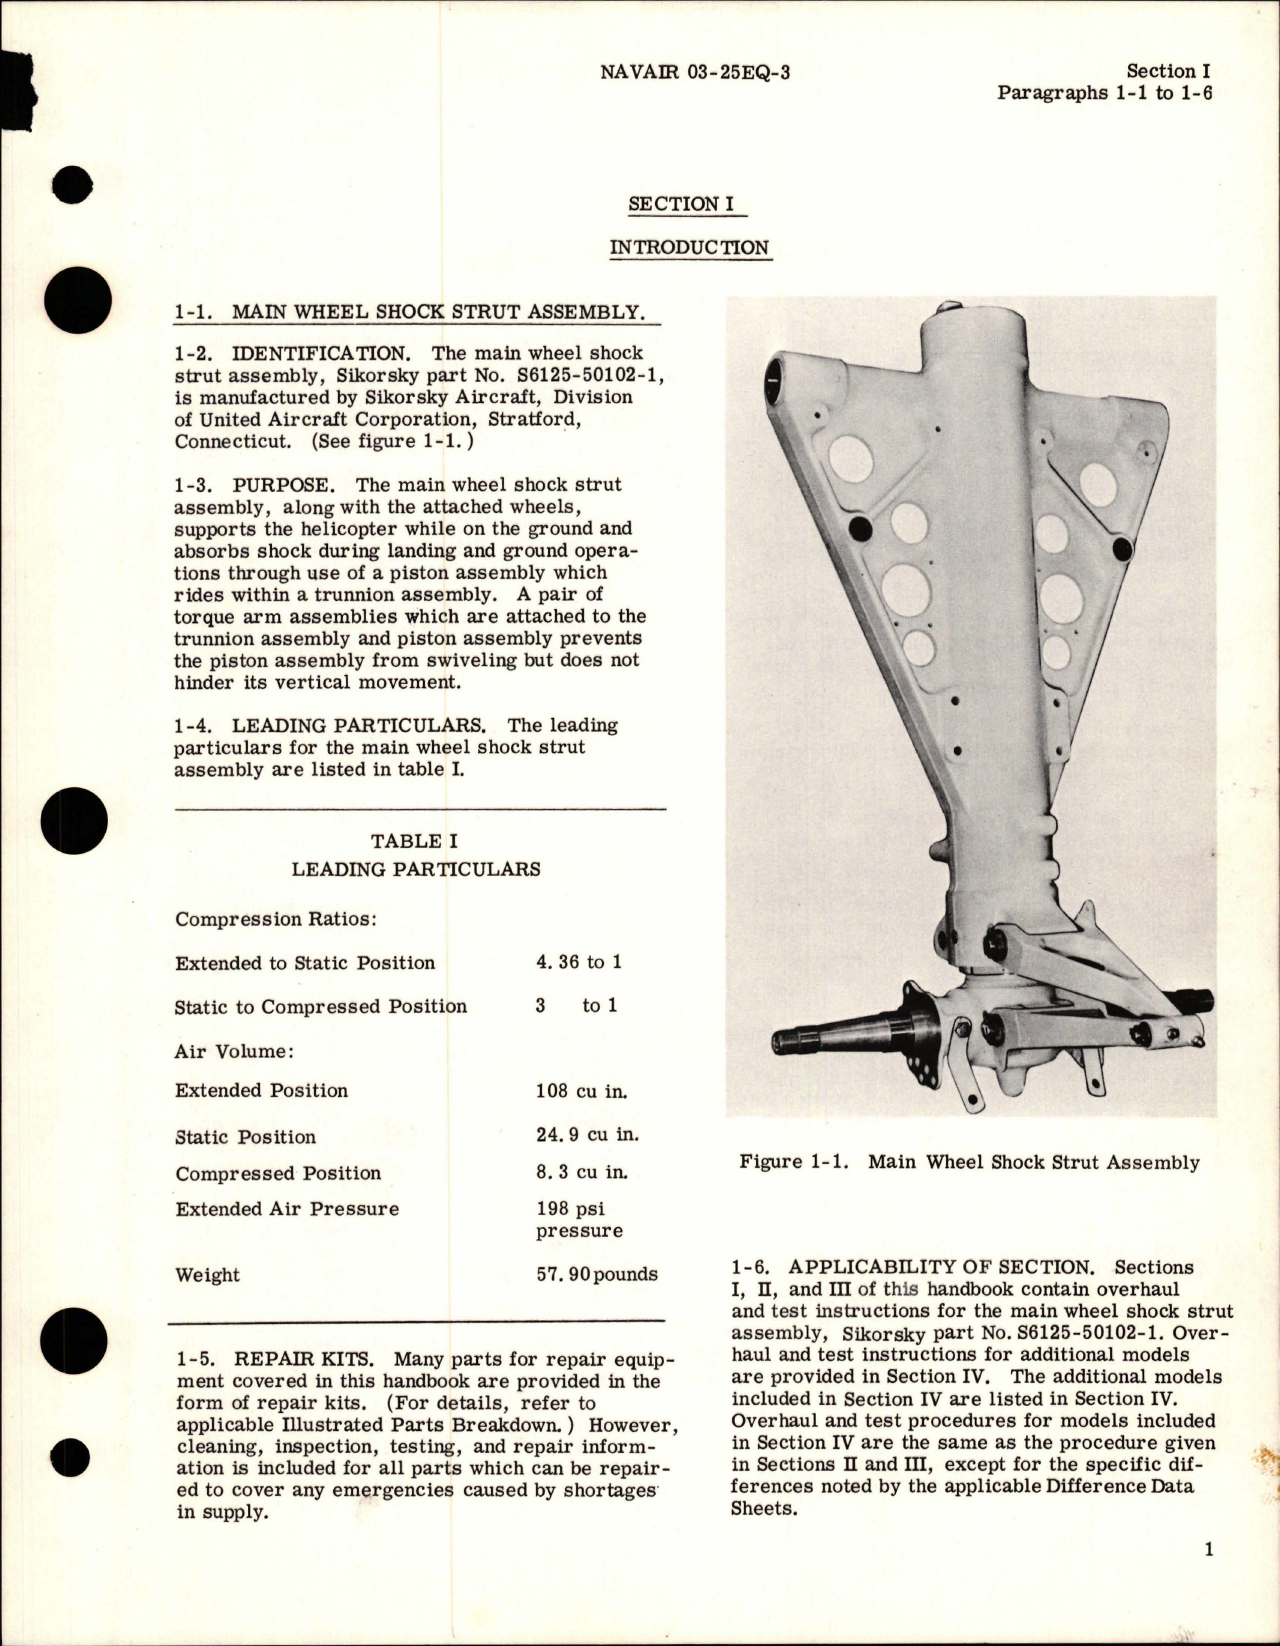 Sample page 5 from AirCorps Library document: Overhaul Instructions for Main Wheel Shock Strut Assembly - Parts S6125-50102-1 and S615-51103-1